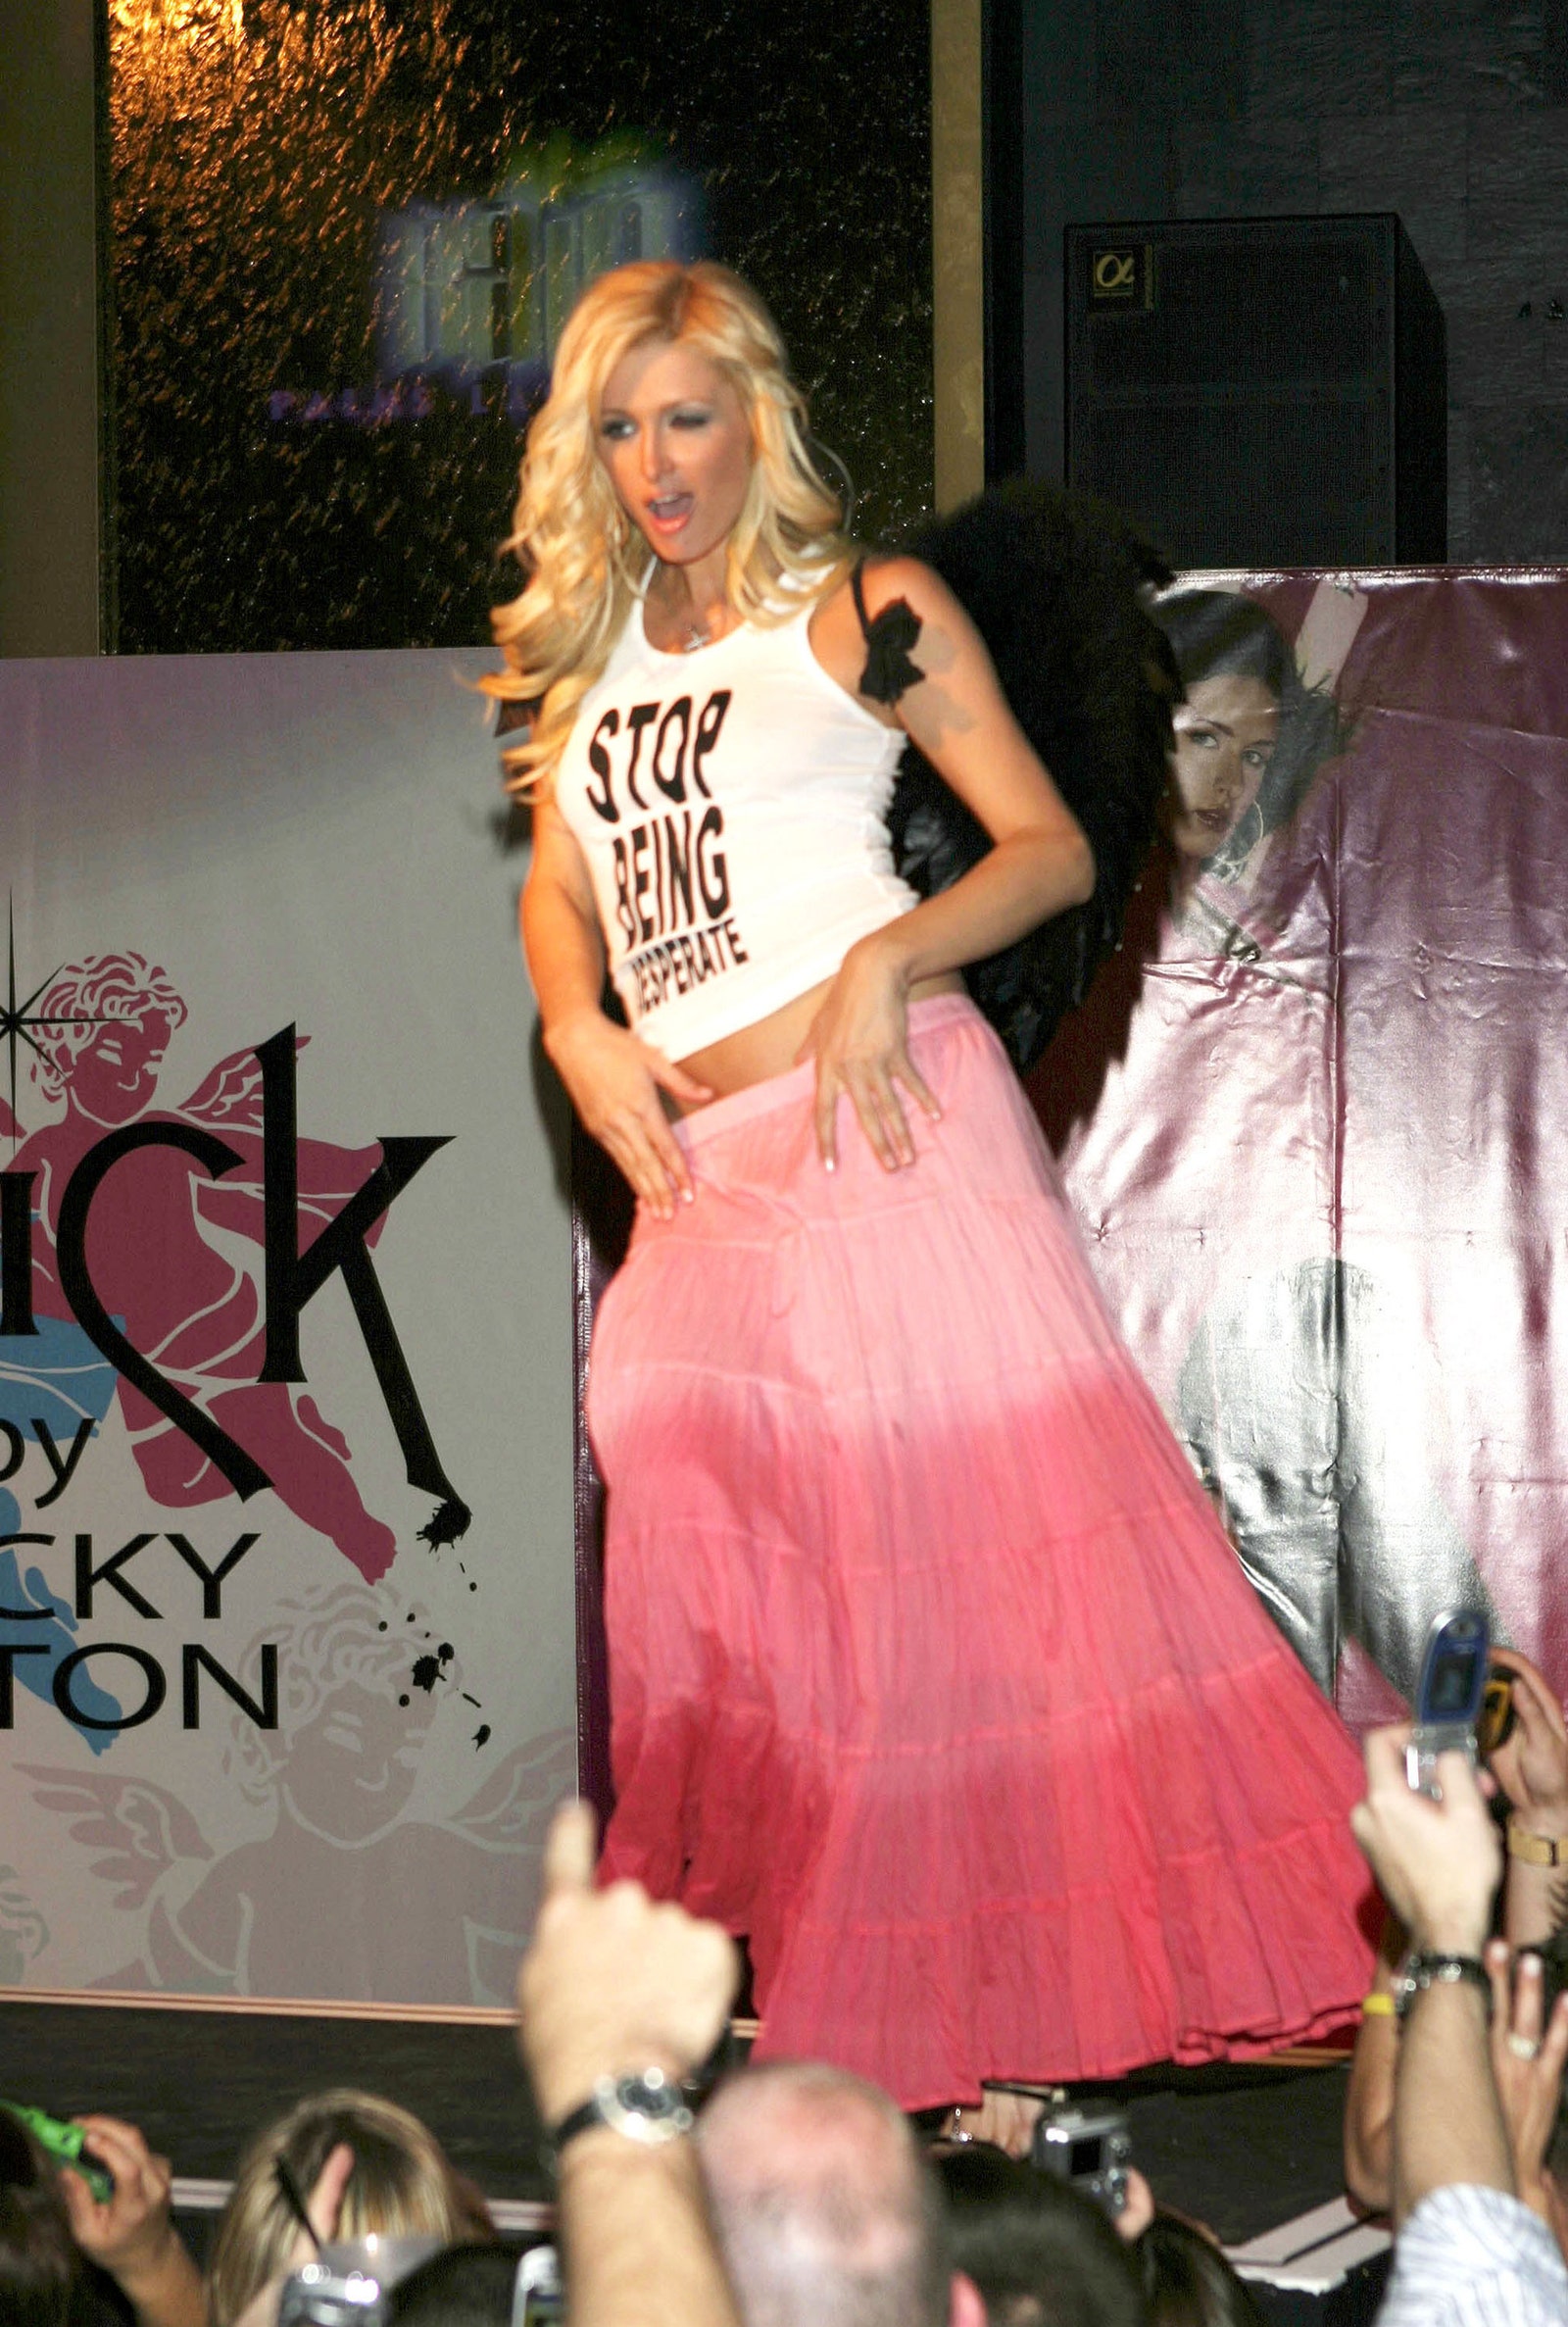 Paris Hilton wearing Chick by Nicky Hilton during Nicky Hilton Launches her New Clothing Line Chick by Nicky Hilton in...